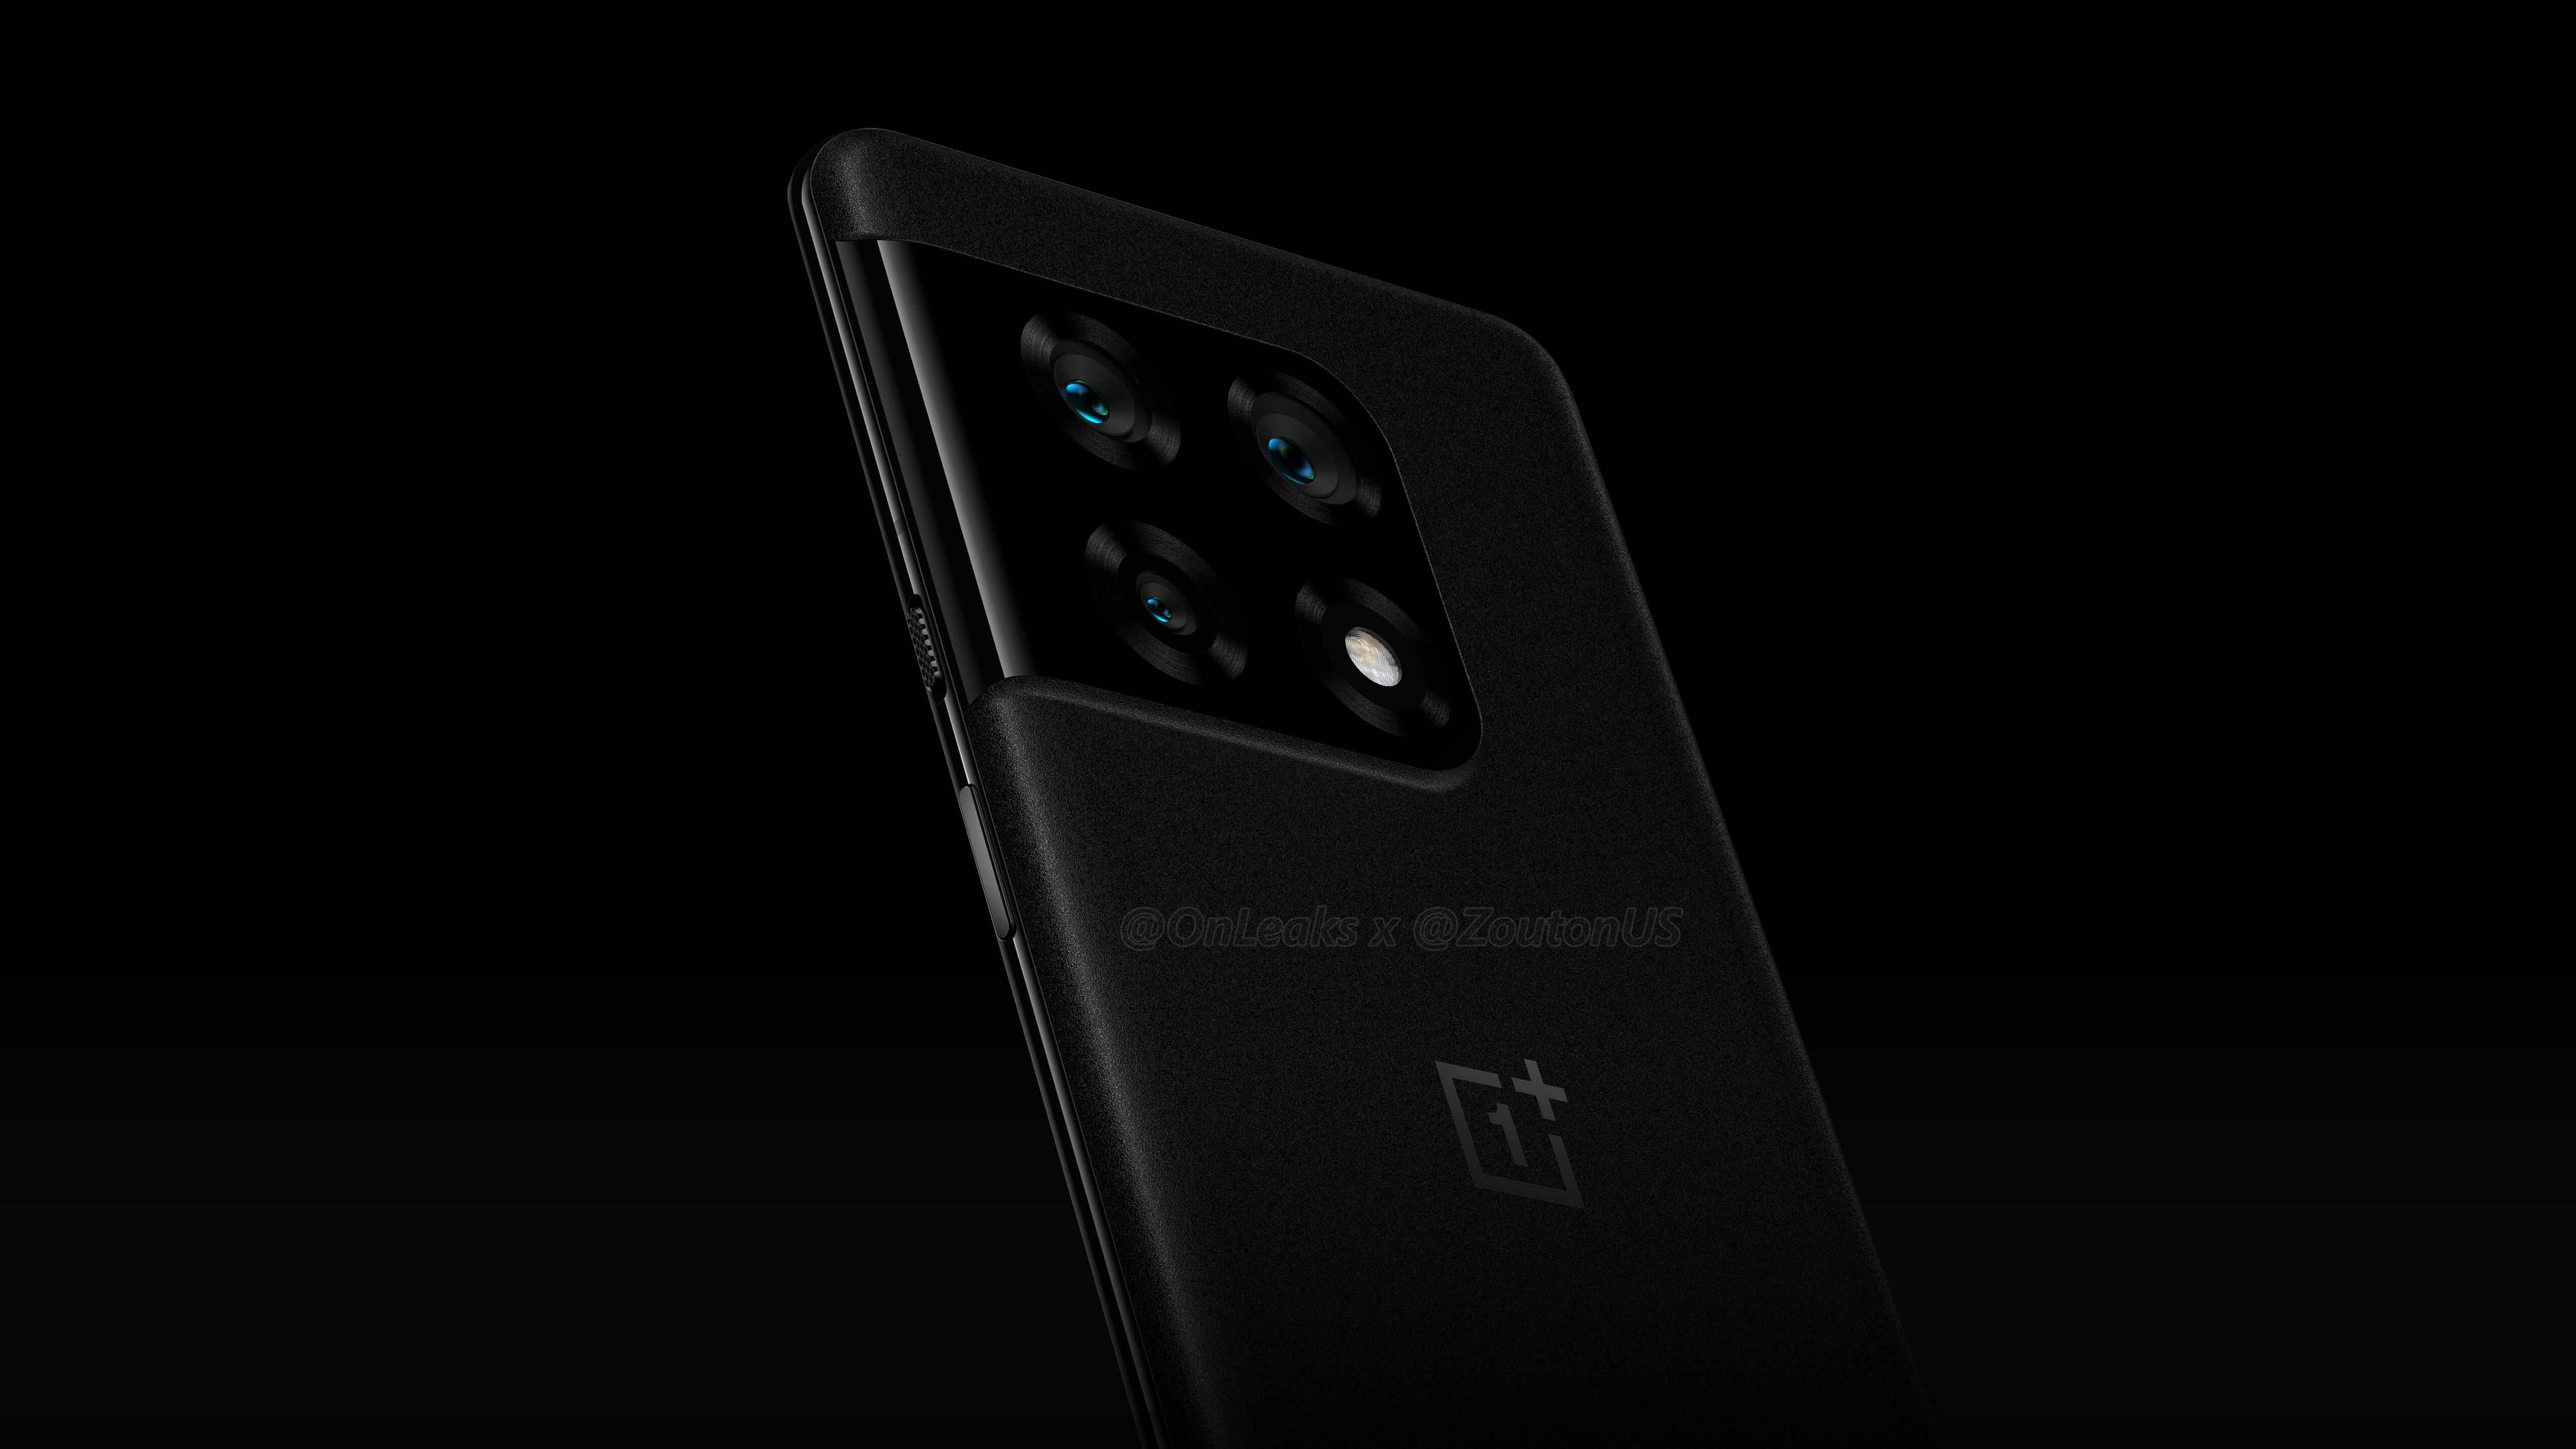 Insider published the first images of OnePlus 10 Pro smartphone